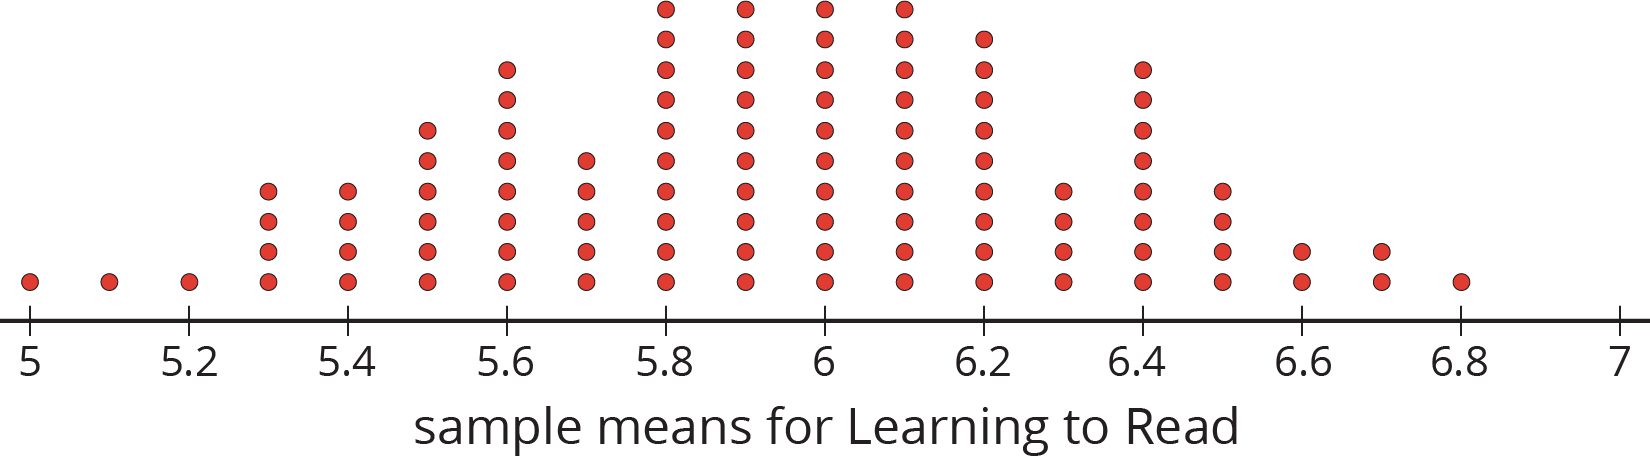 A dot plot for “sample means for Learning to Read” with the numbers 5 through 7, in increments of zero point 2, indicated. The data are as follows:  5 years old, 1 dot. 5 point 1 years old, 1 dot. 5 point 2 years old, 1 dot. 5 point 3 years old, 4 dots. 5 point 4 years old, 4 dots. 5 point 5 years old, 6 dots. 5 point 6 years old, 8 dots. 5 point 7 years old, 5 dots. 5 point 8 years old, 10 dots. 5 point 9 years old, 10 dots. 6 years old, 10 dots. 6 point 1 years old, 10 dots. 6 point 2 years old, 9 dots. 6 point 3 years old, 4 dots. 6 point 4 years old, 8 dots. 6 point 5 years old, 4 dots. 6 point 6 years old, 2 dots. 6 point 7 years old, 2 dots. 6 point 8 years old, 1 dot.